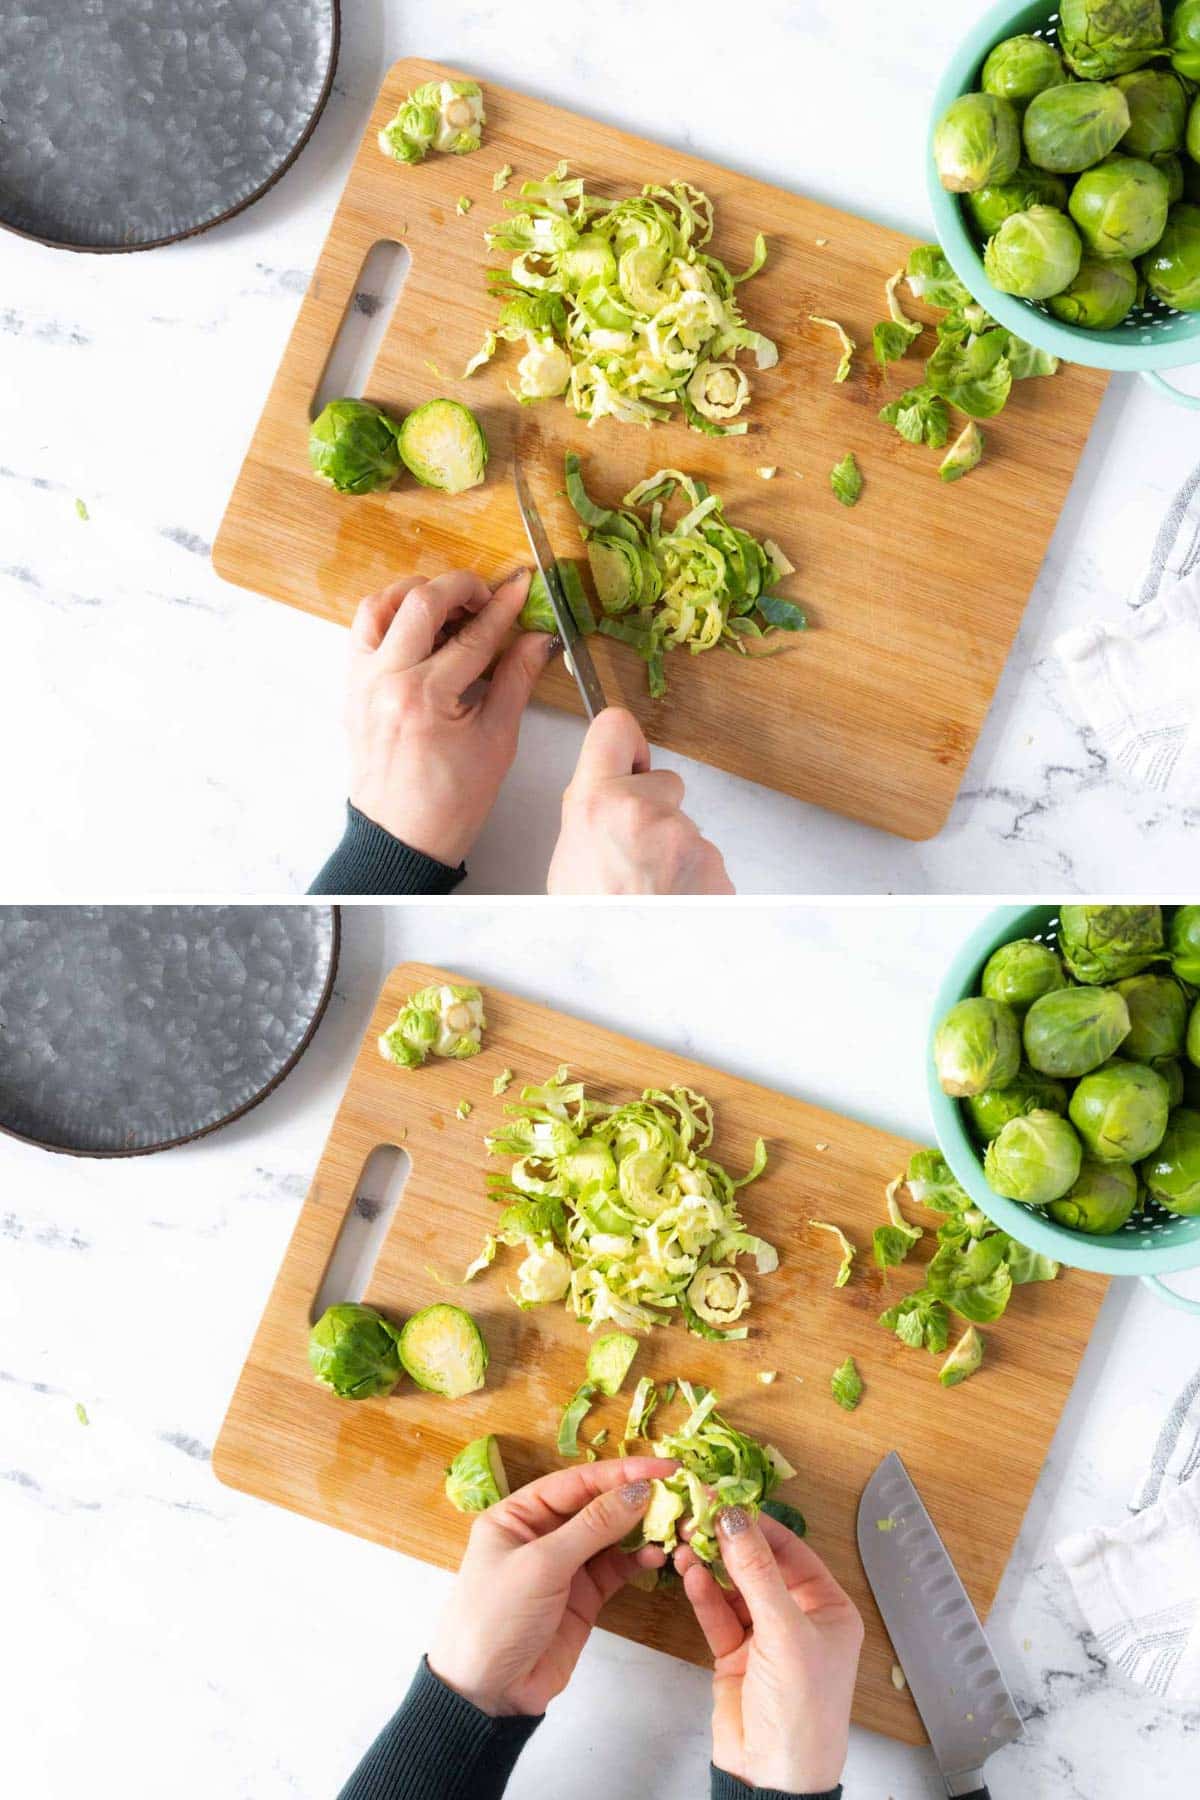 Person cutting brussels sprouts.